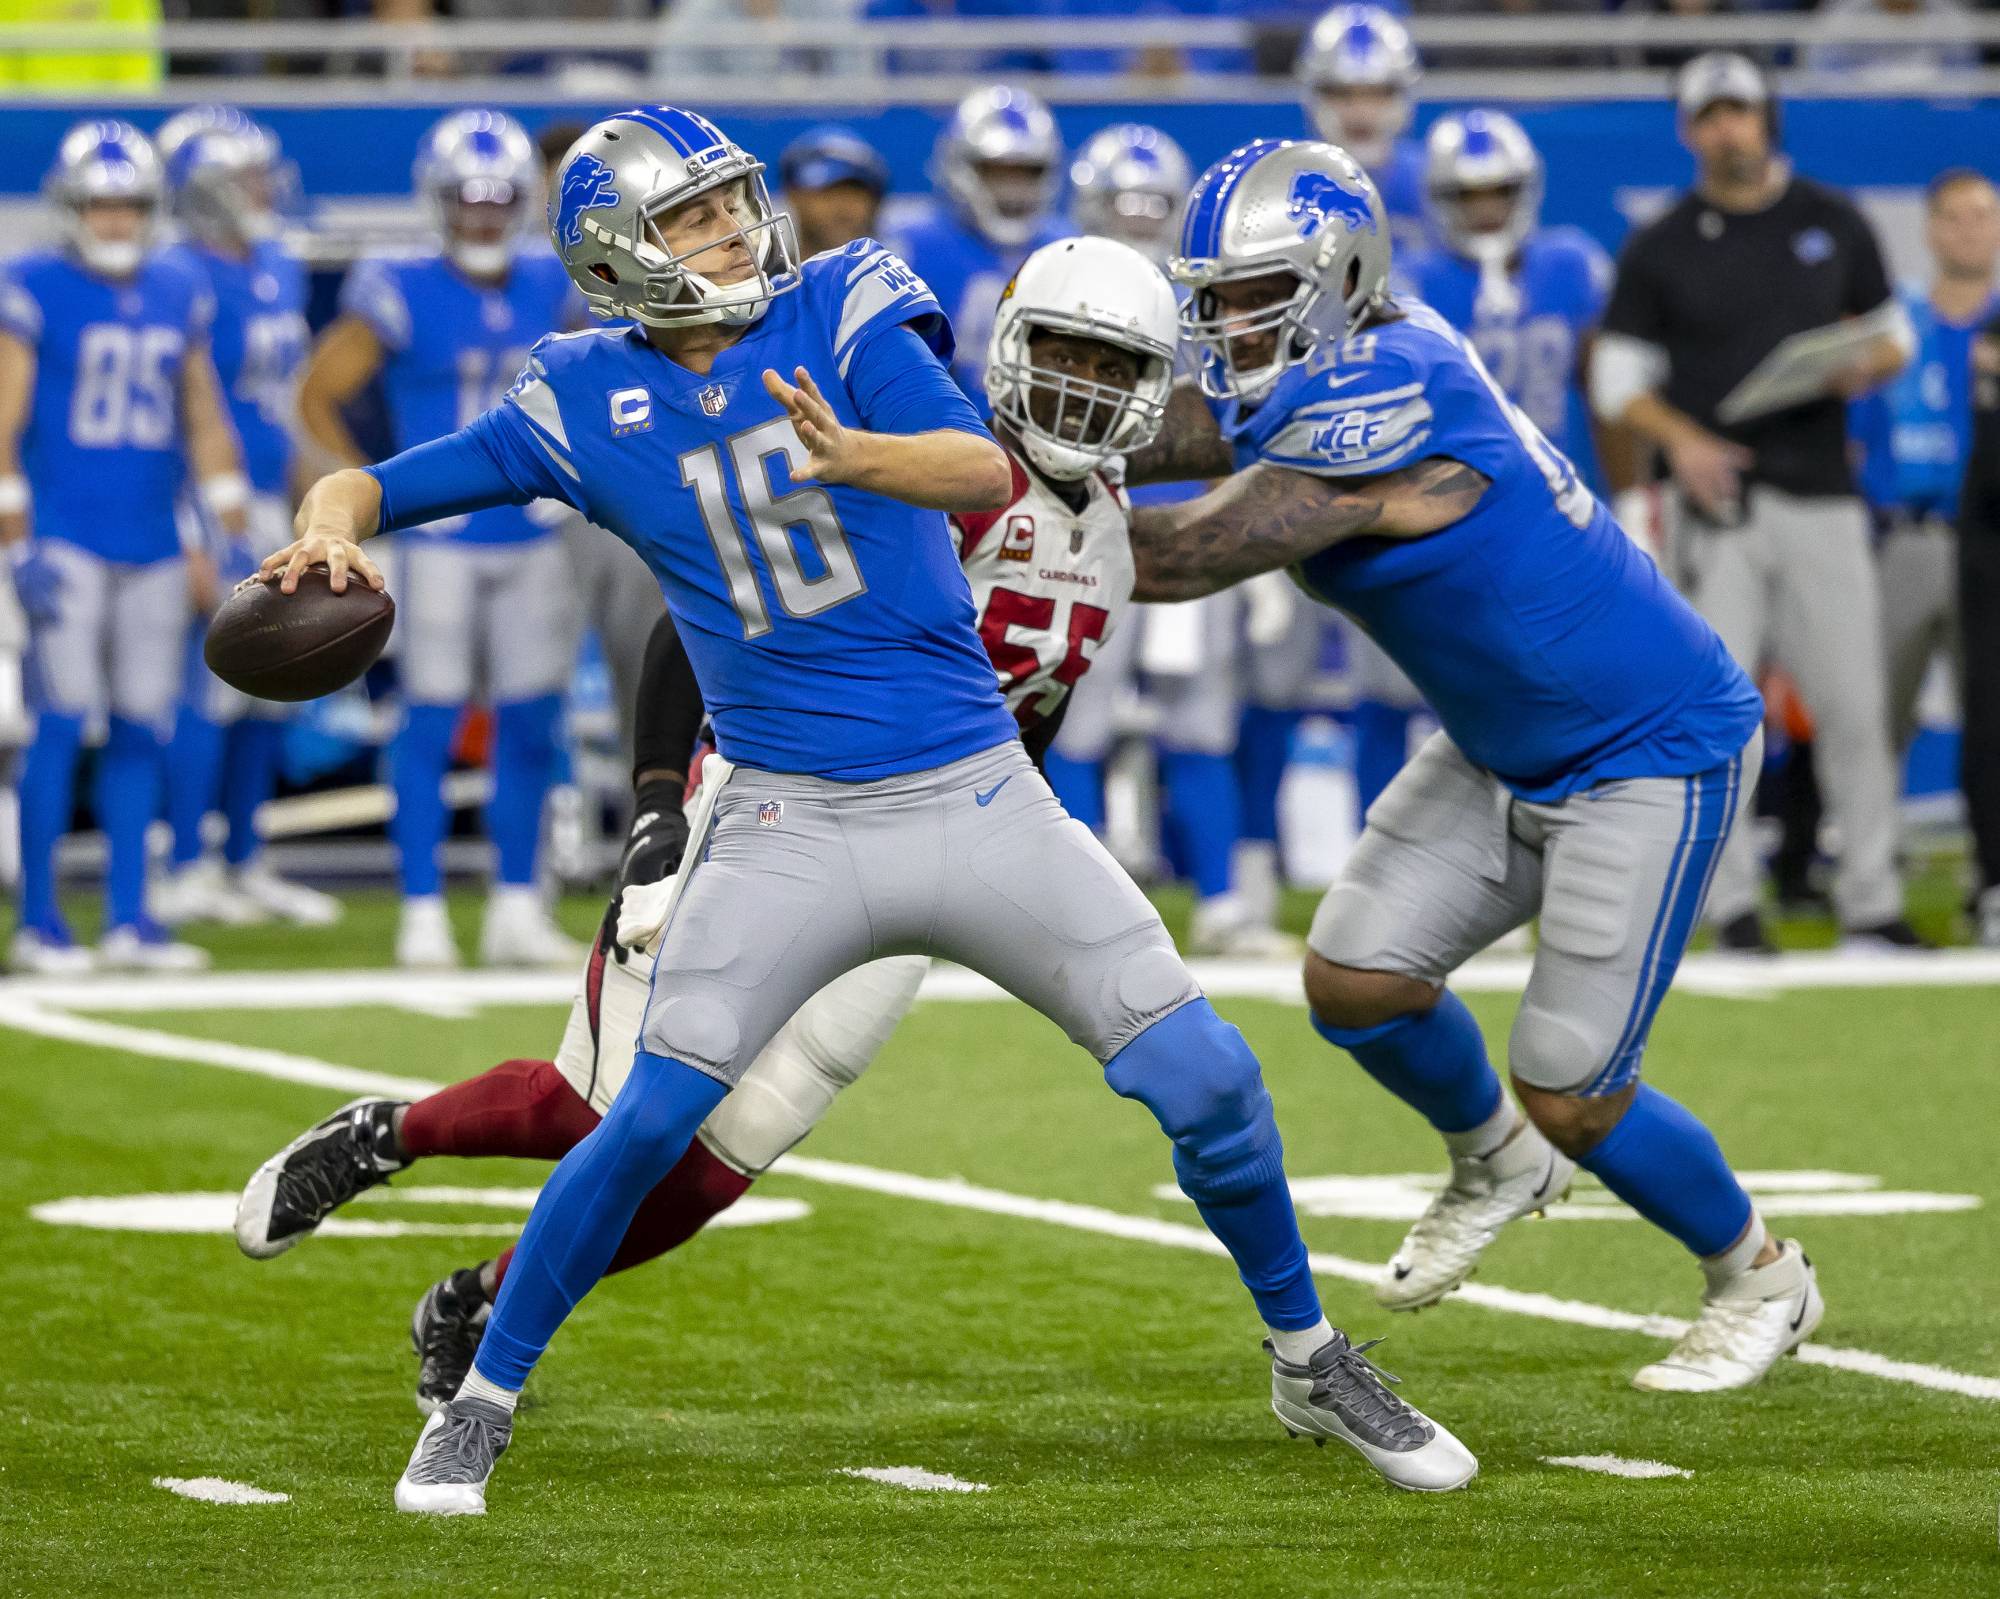 Improving Lions hoping to continue recent progress